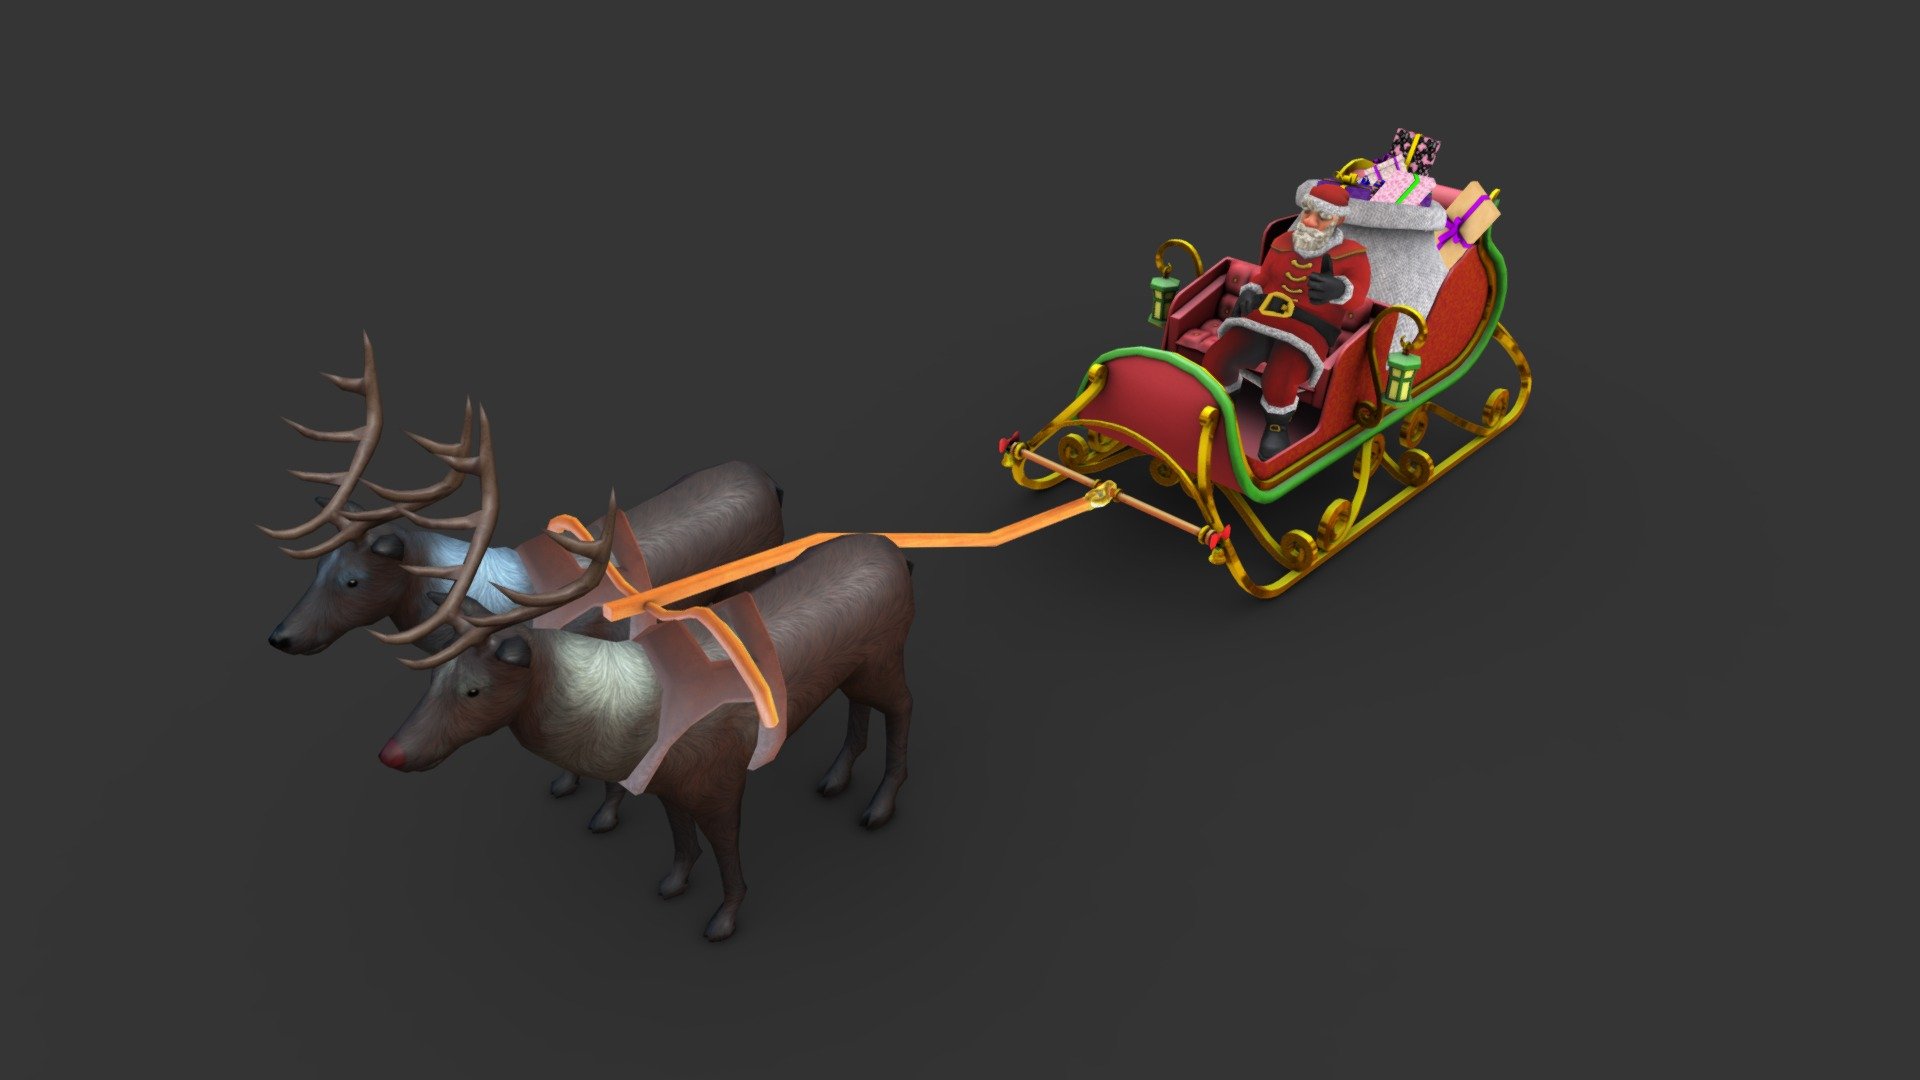 3D model in fbx format

6x 2048 textures for santa, sleigh, gifts, equipment, 2xreindeers

8 santa poses + tpose

reindeers also rigged

Rigged with mixamo and corrected by hand

Comes with blend file with RIG - Character Santa sleigh reindeers Lowpoly rigged - Buy Royalty Free 3D model by mahrcheen 3d model